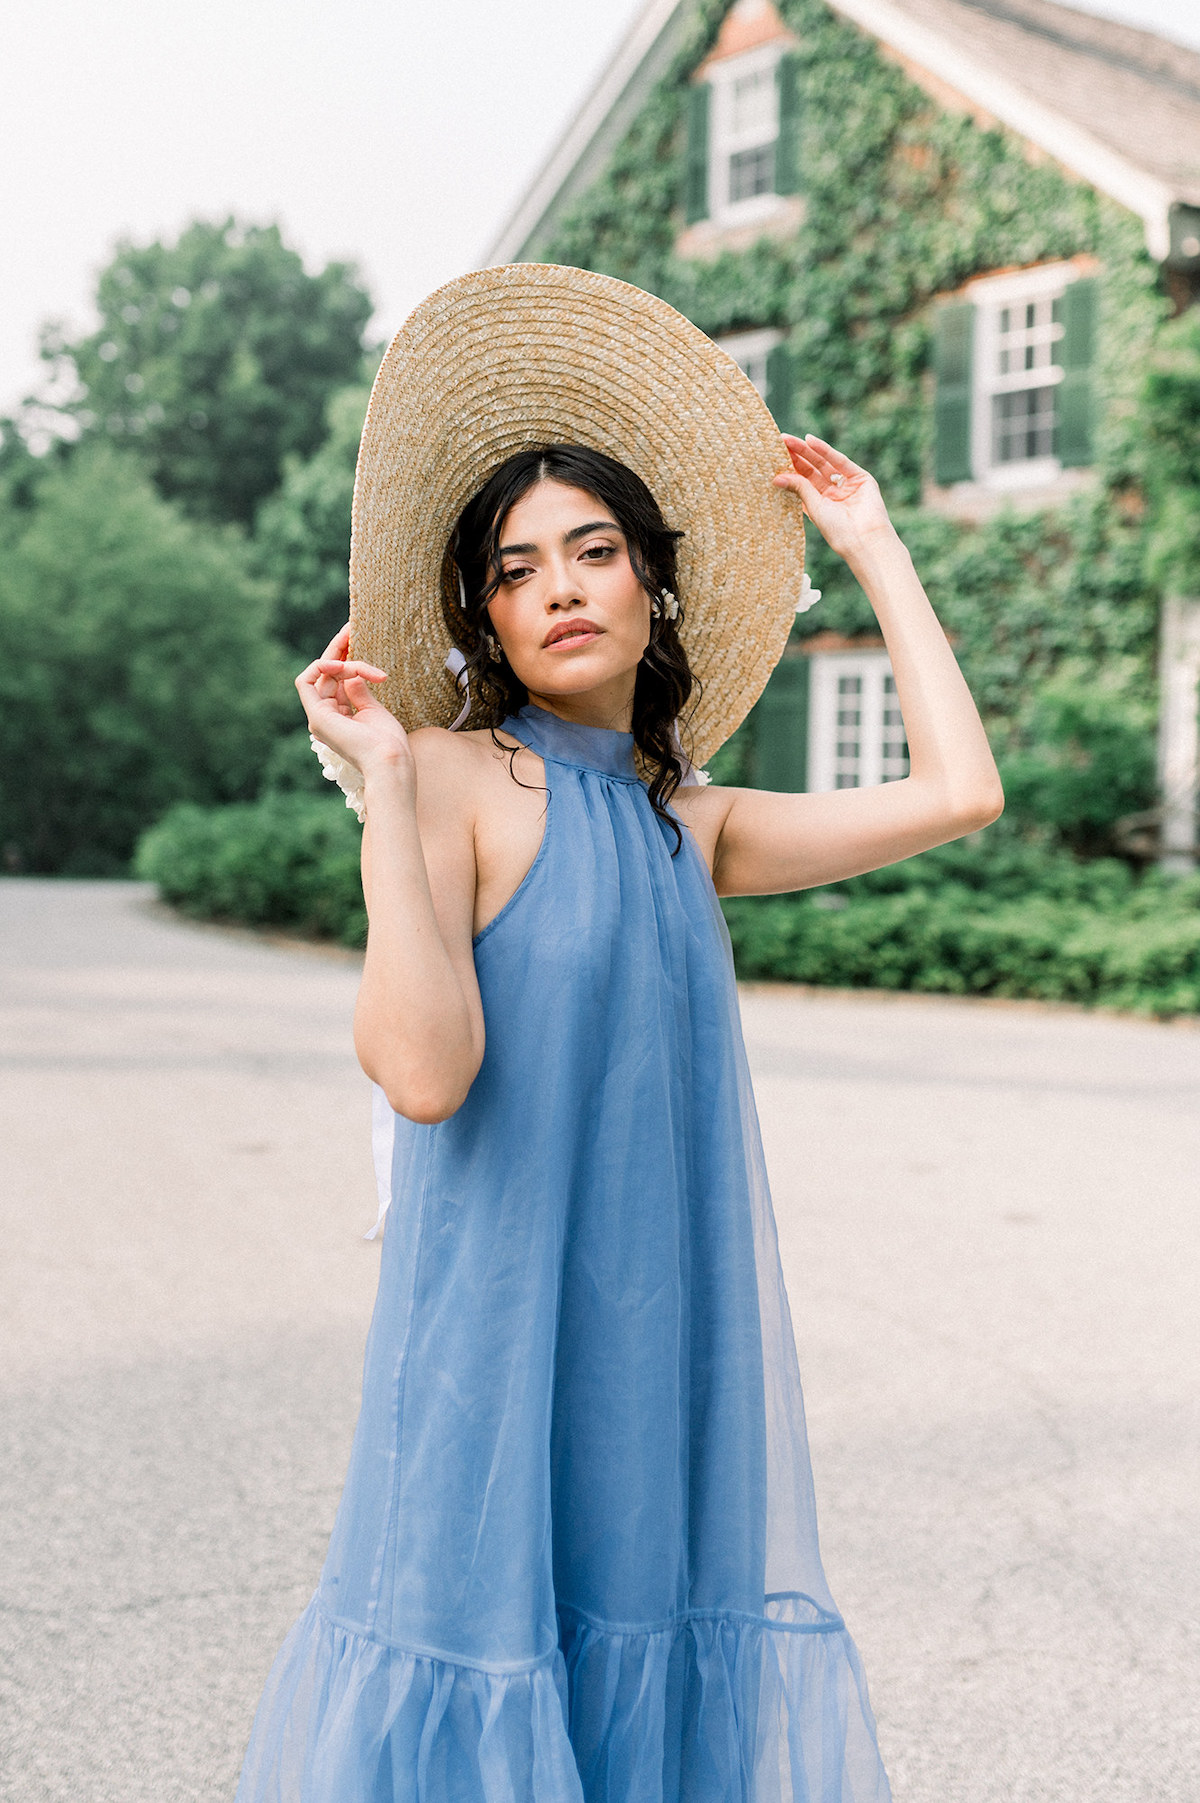 Karla, our model, wearing a French blue tea-length gown with a white hydrangea-adorned boat-style hat at Longwood Gardens, Pennsylvania.